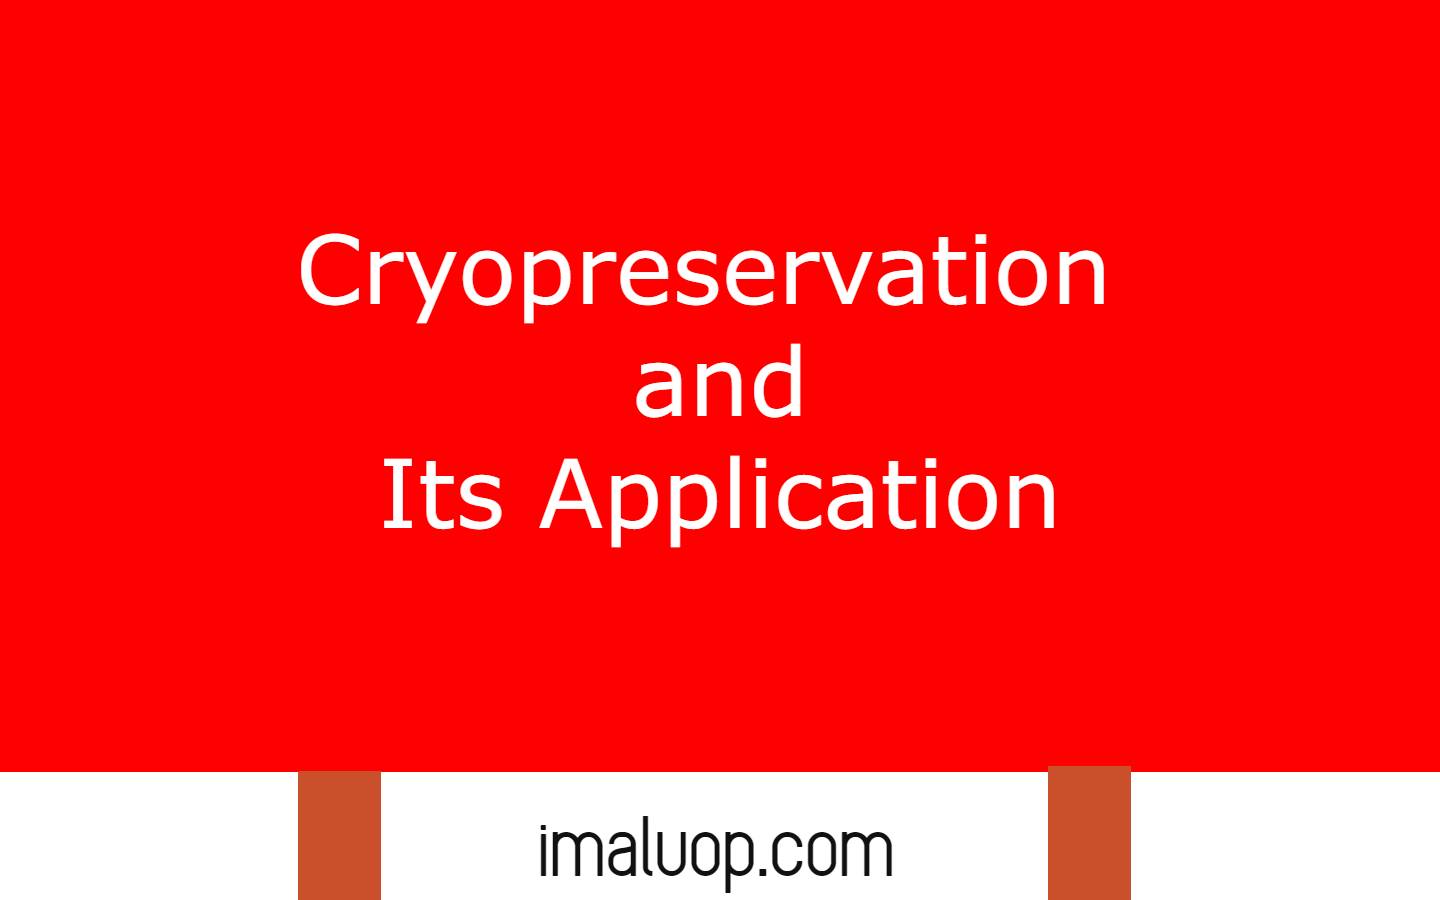 Cryopreservation and Its Application